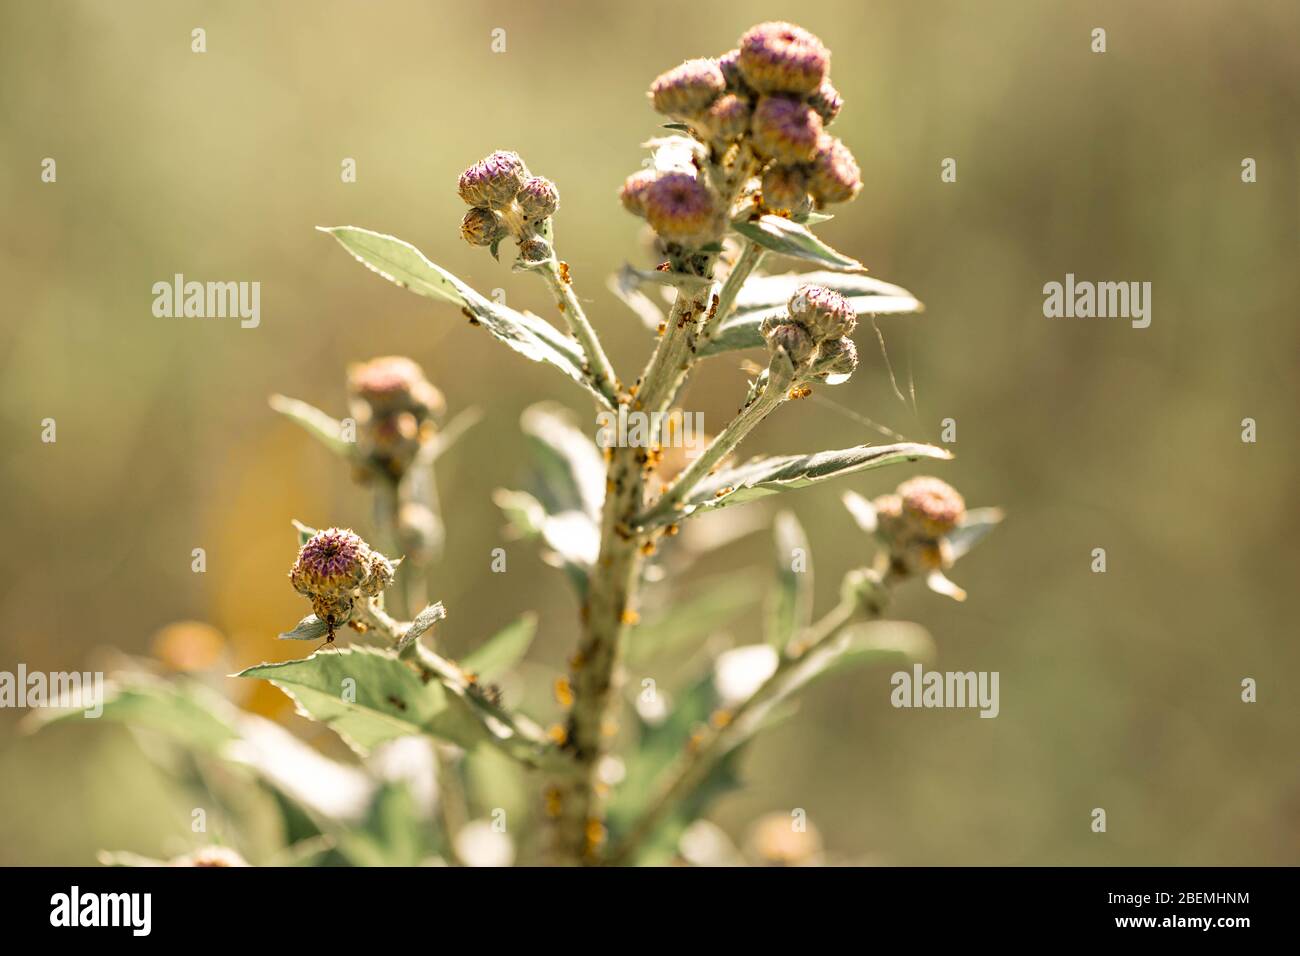 Ants are social insects. Ants covered the plant. Ants on the plant close up. Belarus, nature summer background. Stock Photo